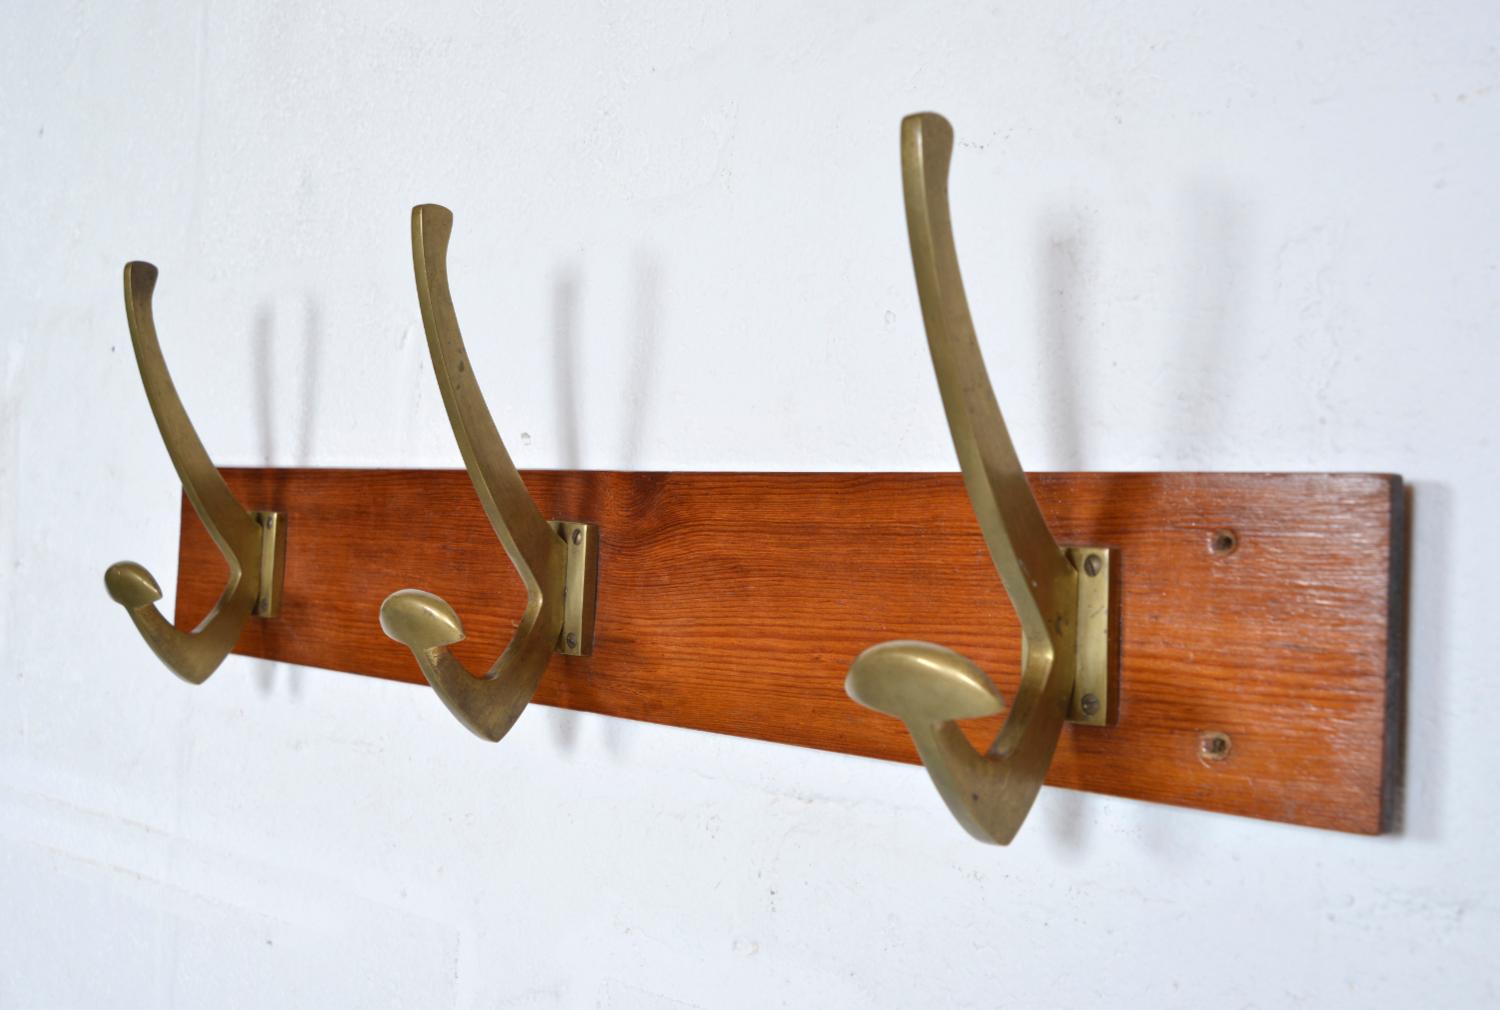 A highly unusual set of three brass coat hangers dating from the 1950s, reclaimed from a Gentleman’s Clubhouse. The lower hook is a broad arm so is perfect for more delicate shaped jackets thus causing minimal stress to your coats or Bowler hat! The